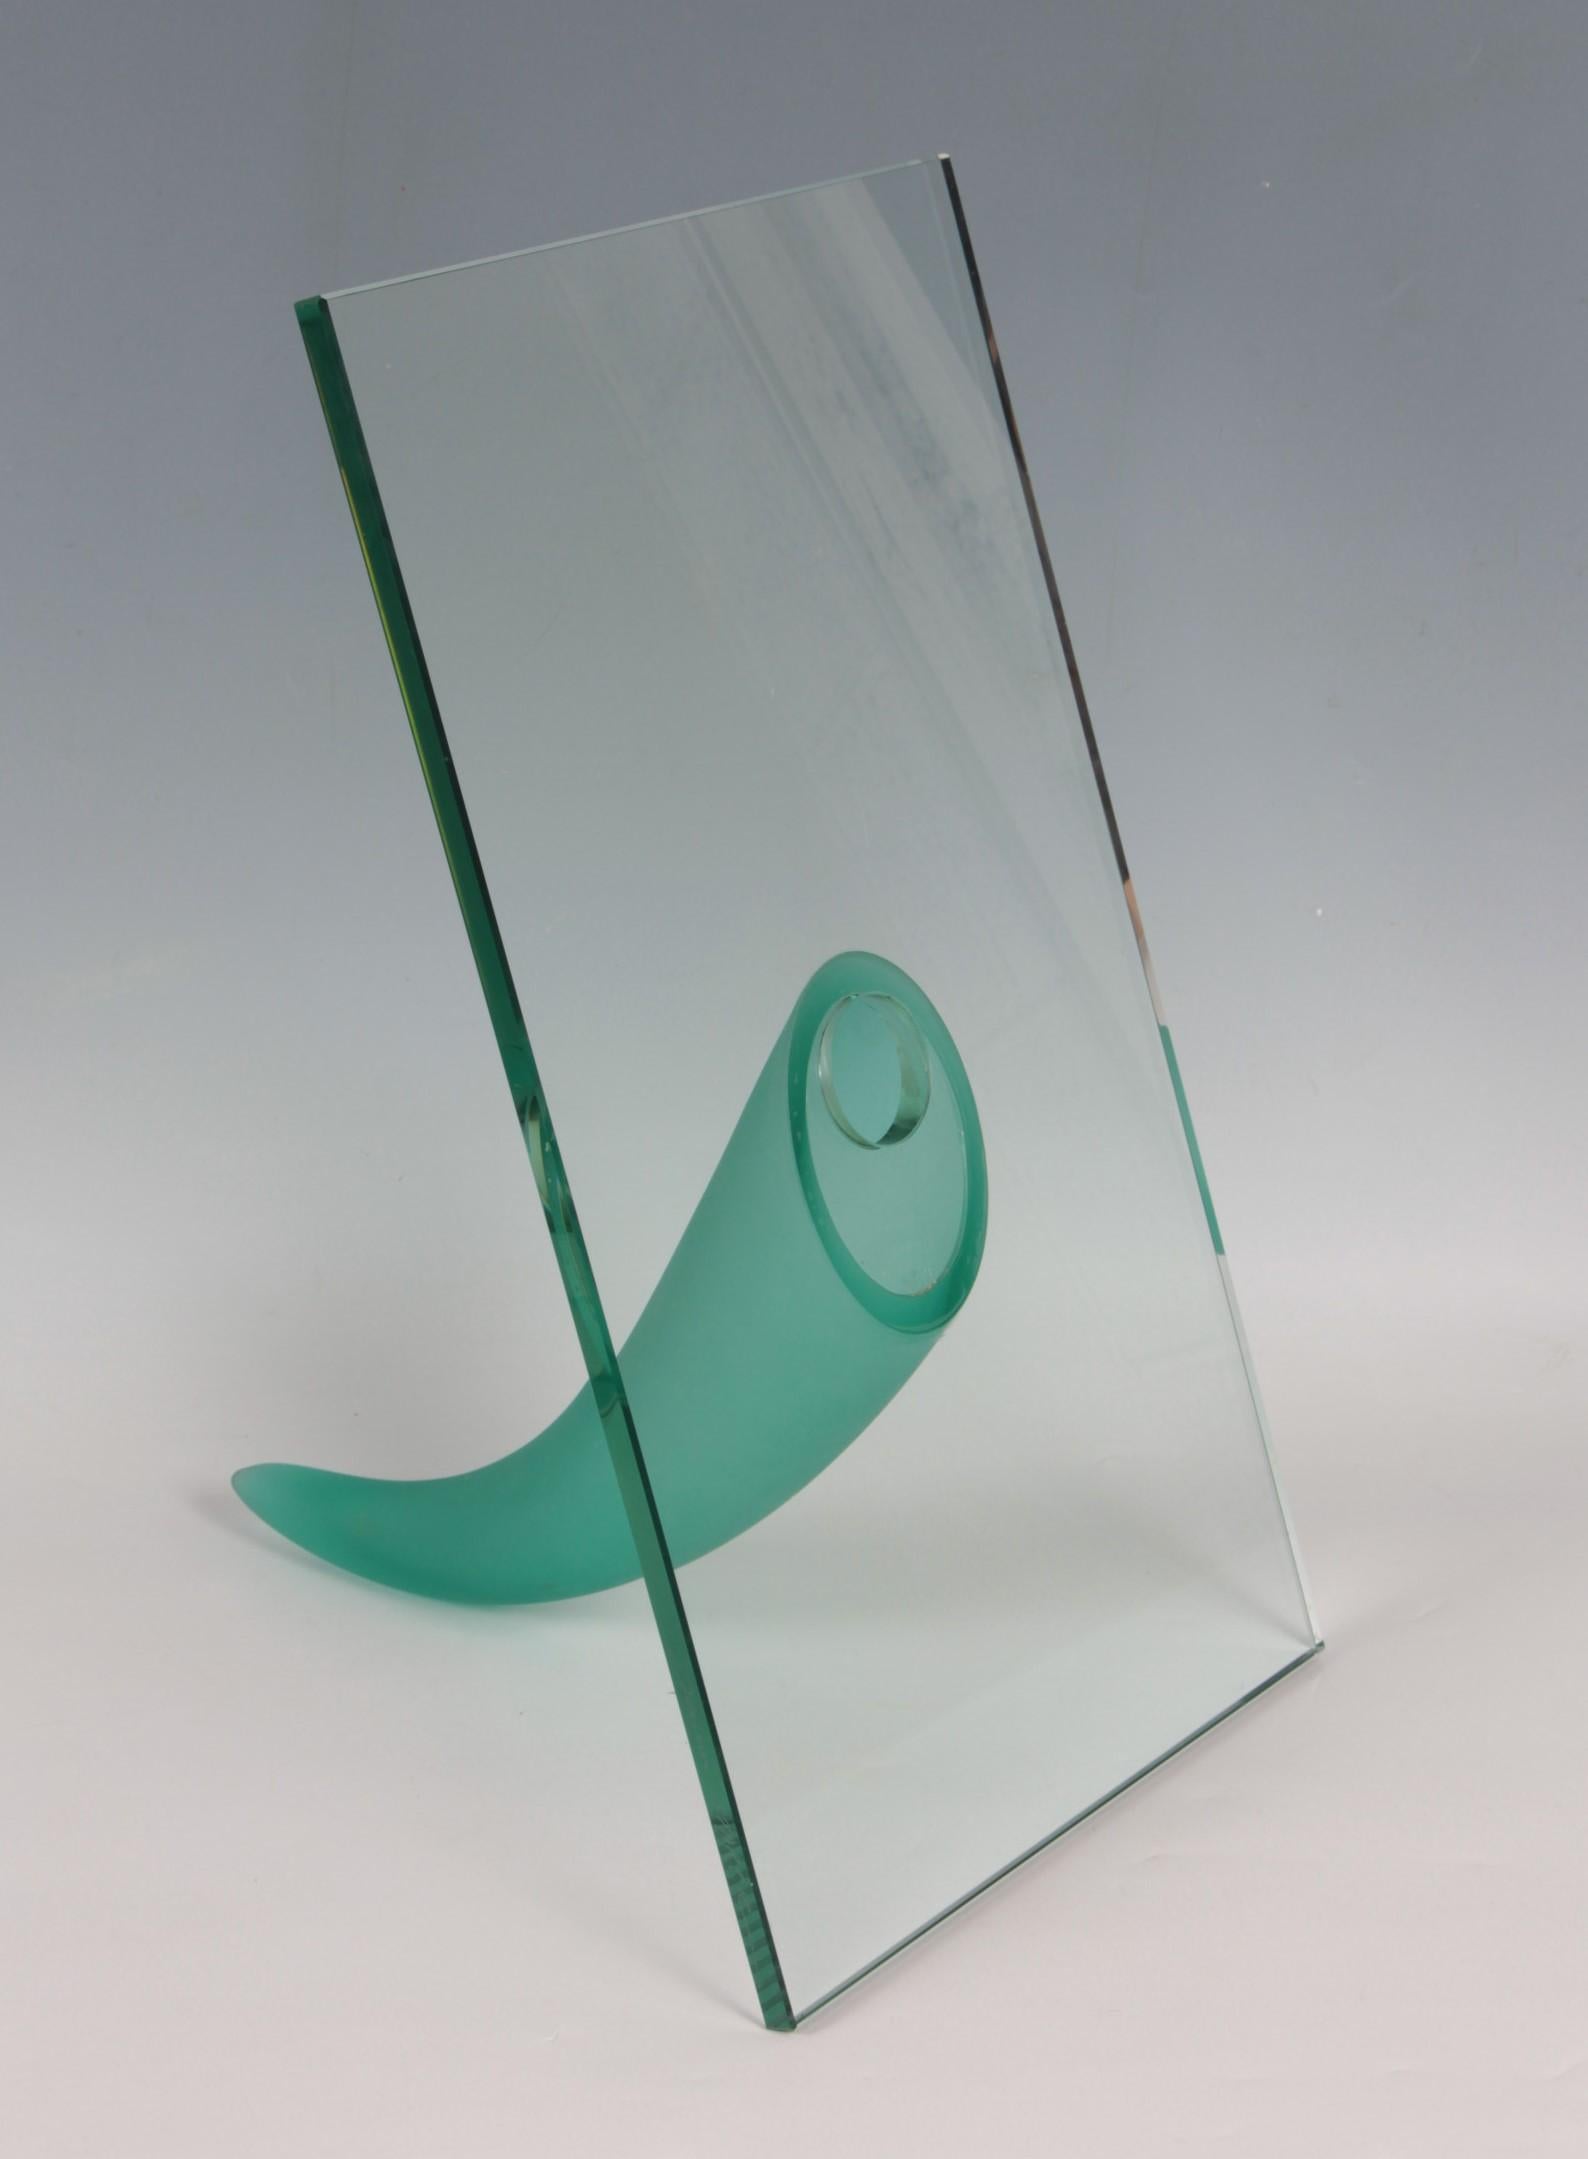 Philippe Starck (né en 1949) - Daum,
circa 1990.
Une étrangeté sous un mur.

Vase-sculpture in crystal and glass paste representing a cornucopia of green satin glass fixed on a thick crystal slab.
Incised handwritten signature 